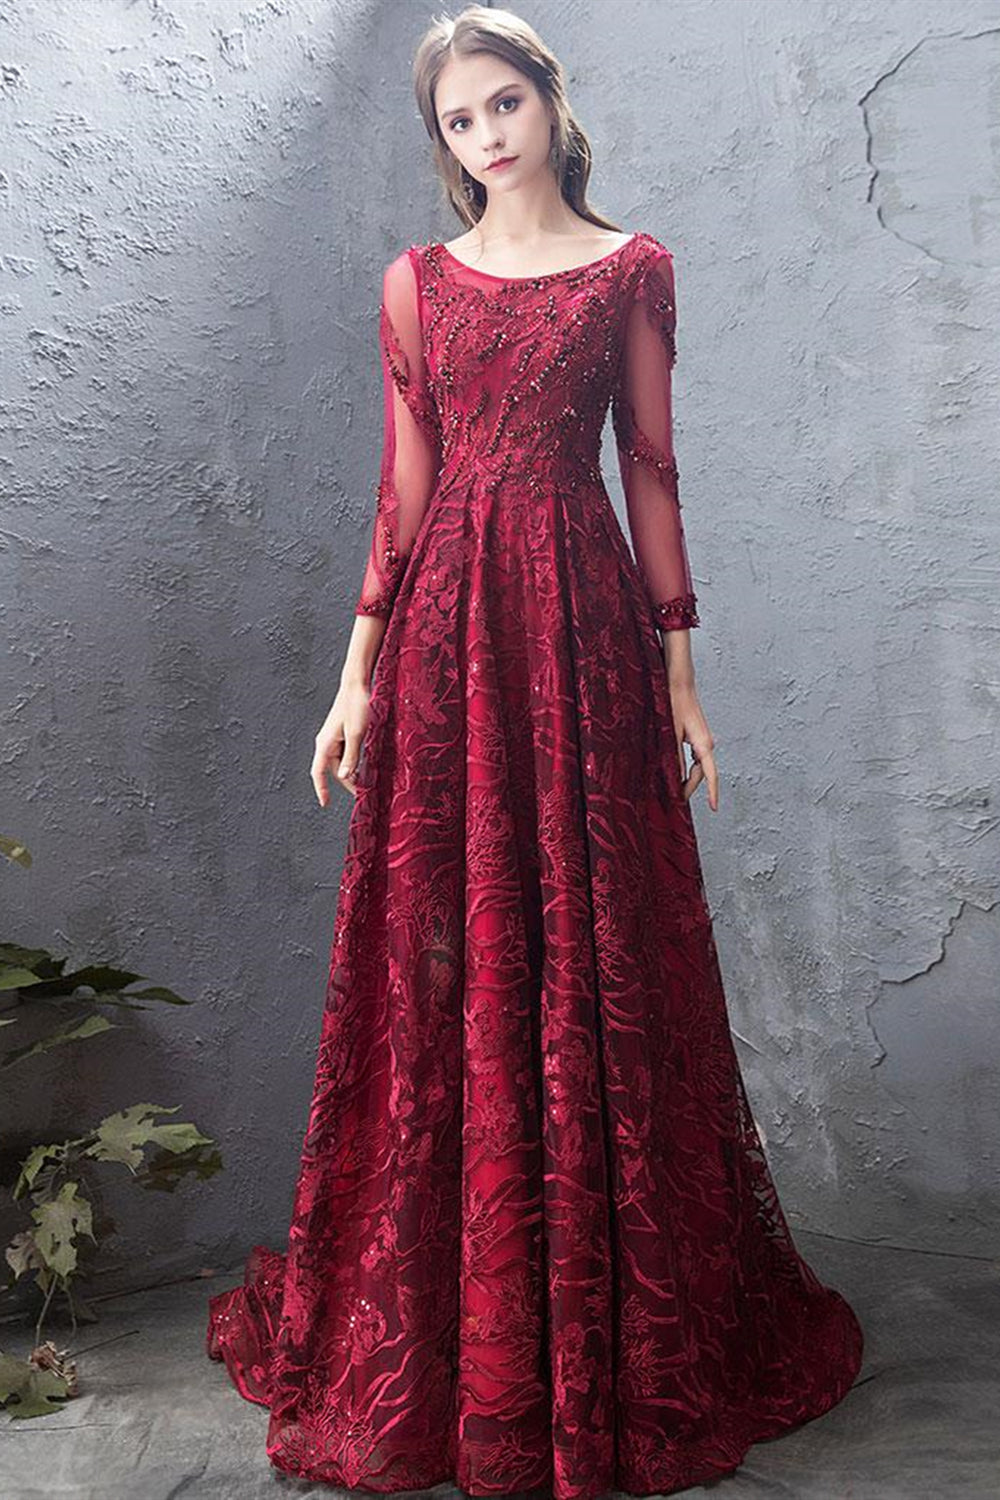 Long Sleeves Beaded Burgundy Lace Long Prom Dresses, Burgundy Lace Formal Dresses, Burgundy Evening Dresses